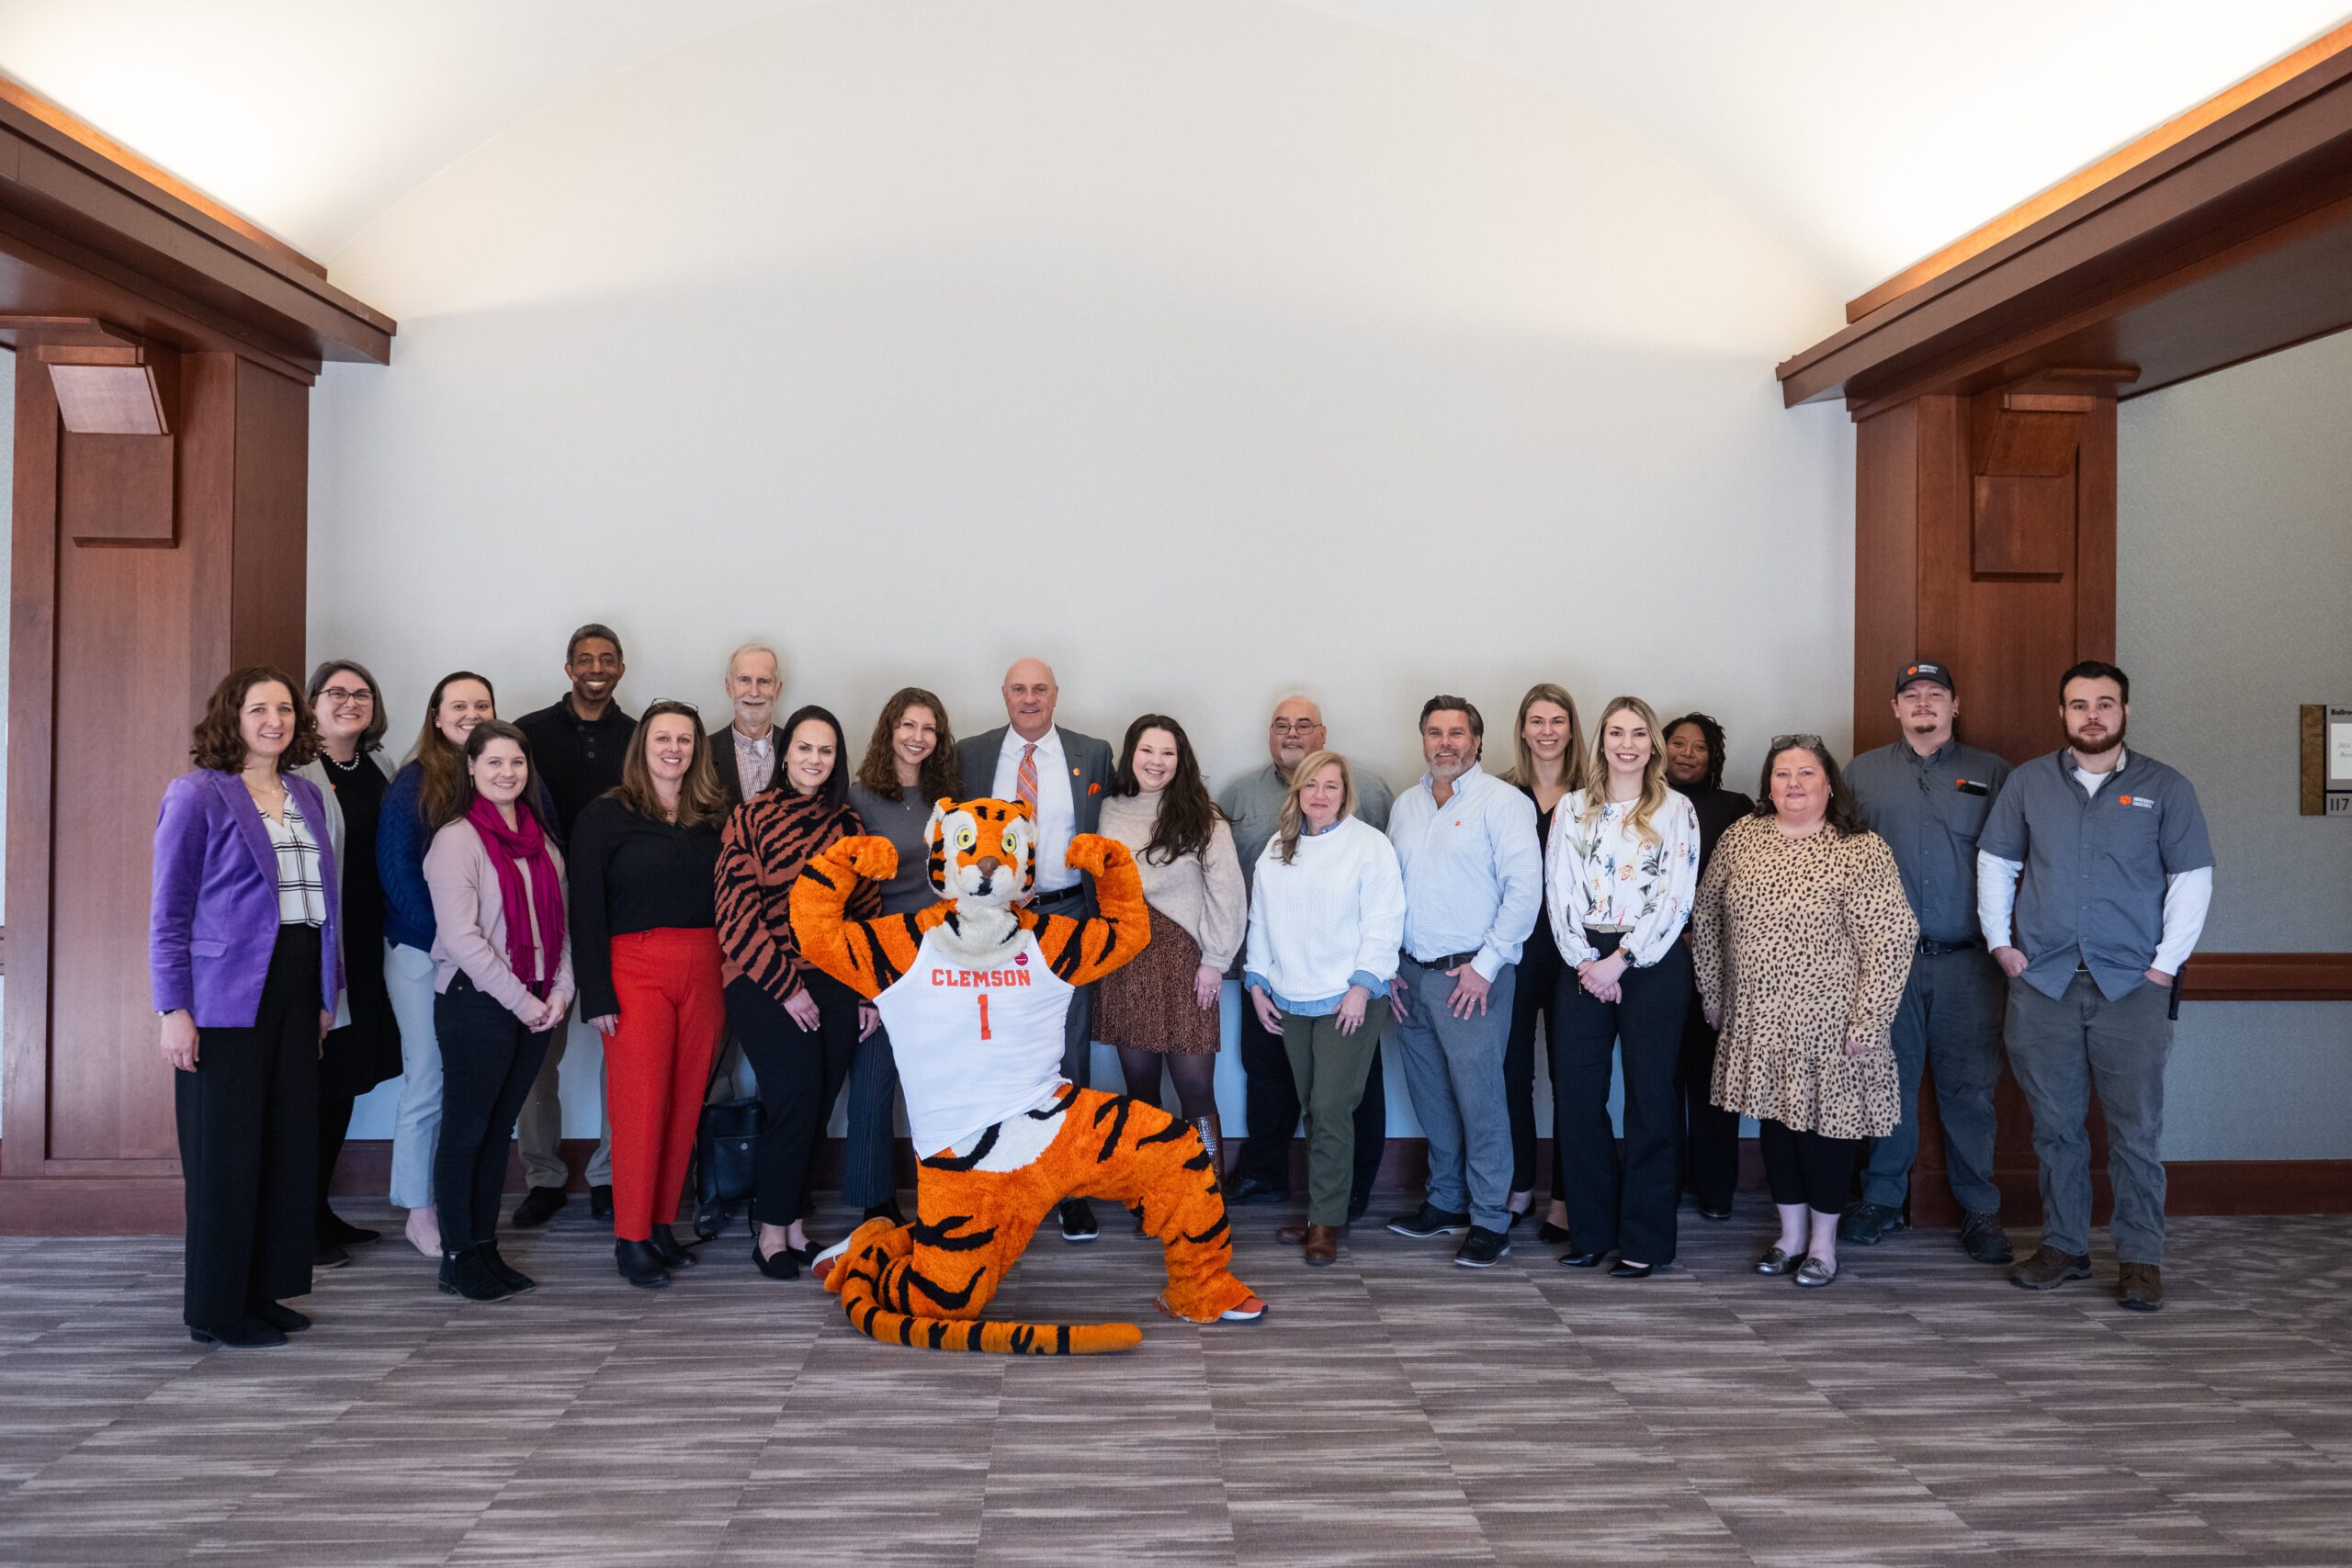 A group of individuals pose with the Clemson Tiger at the degree attainment luncheon.